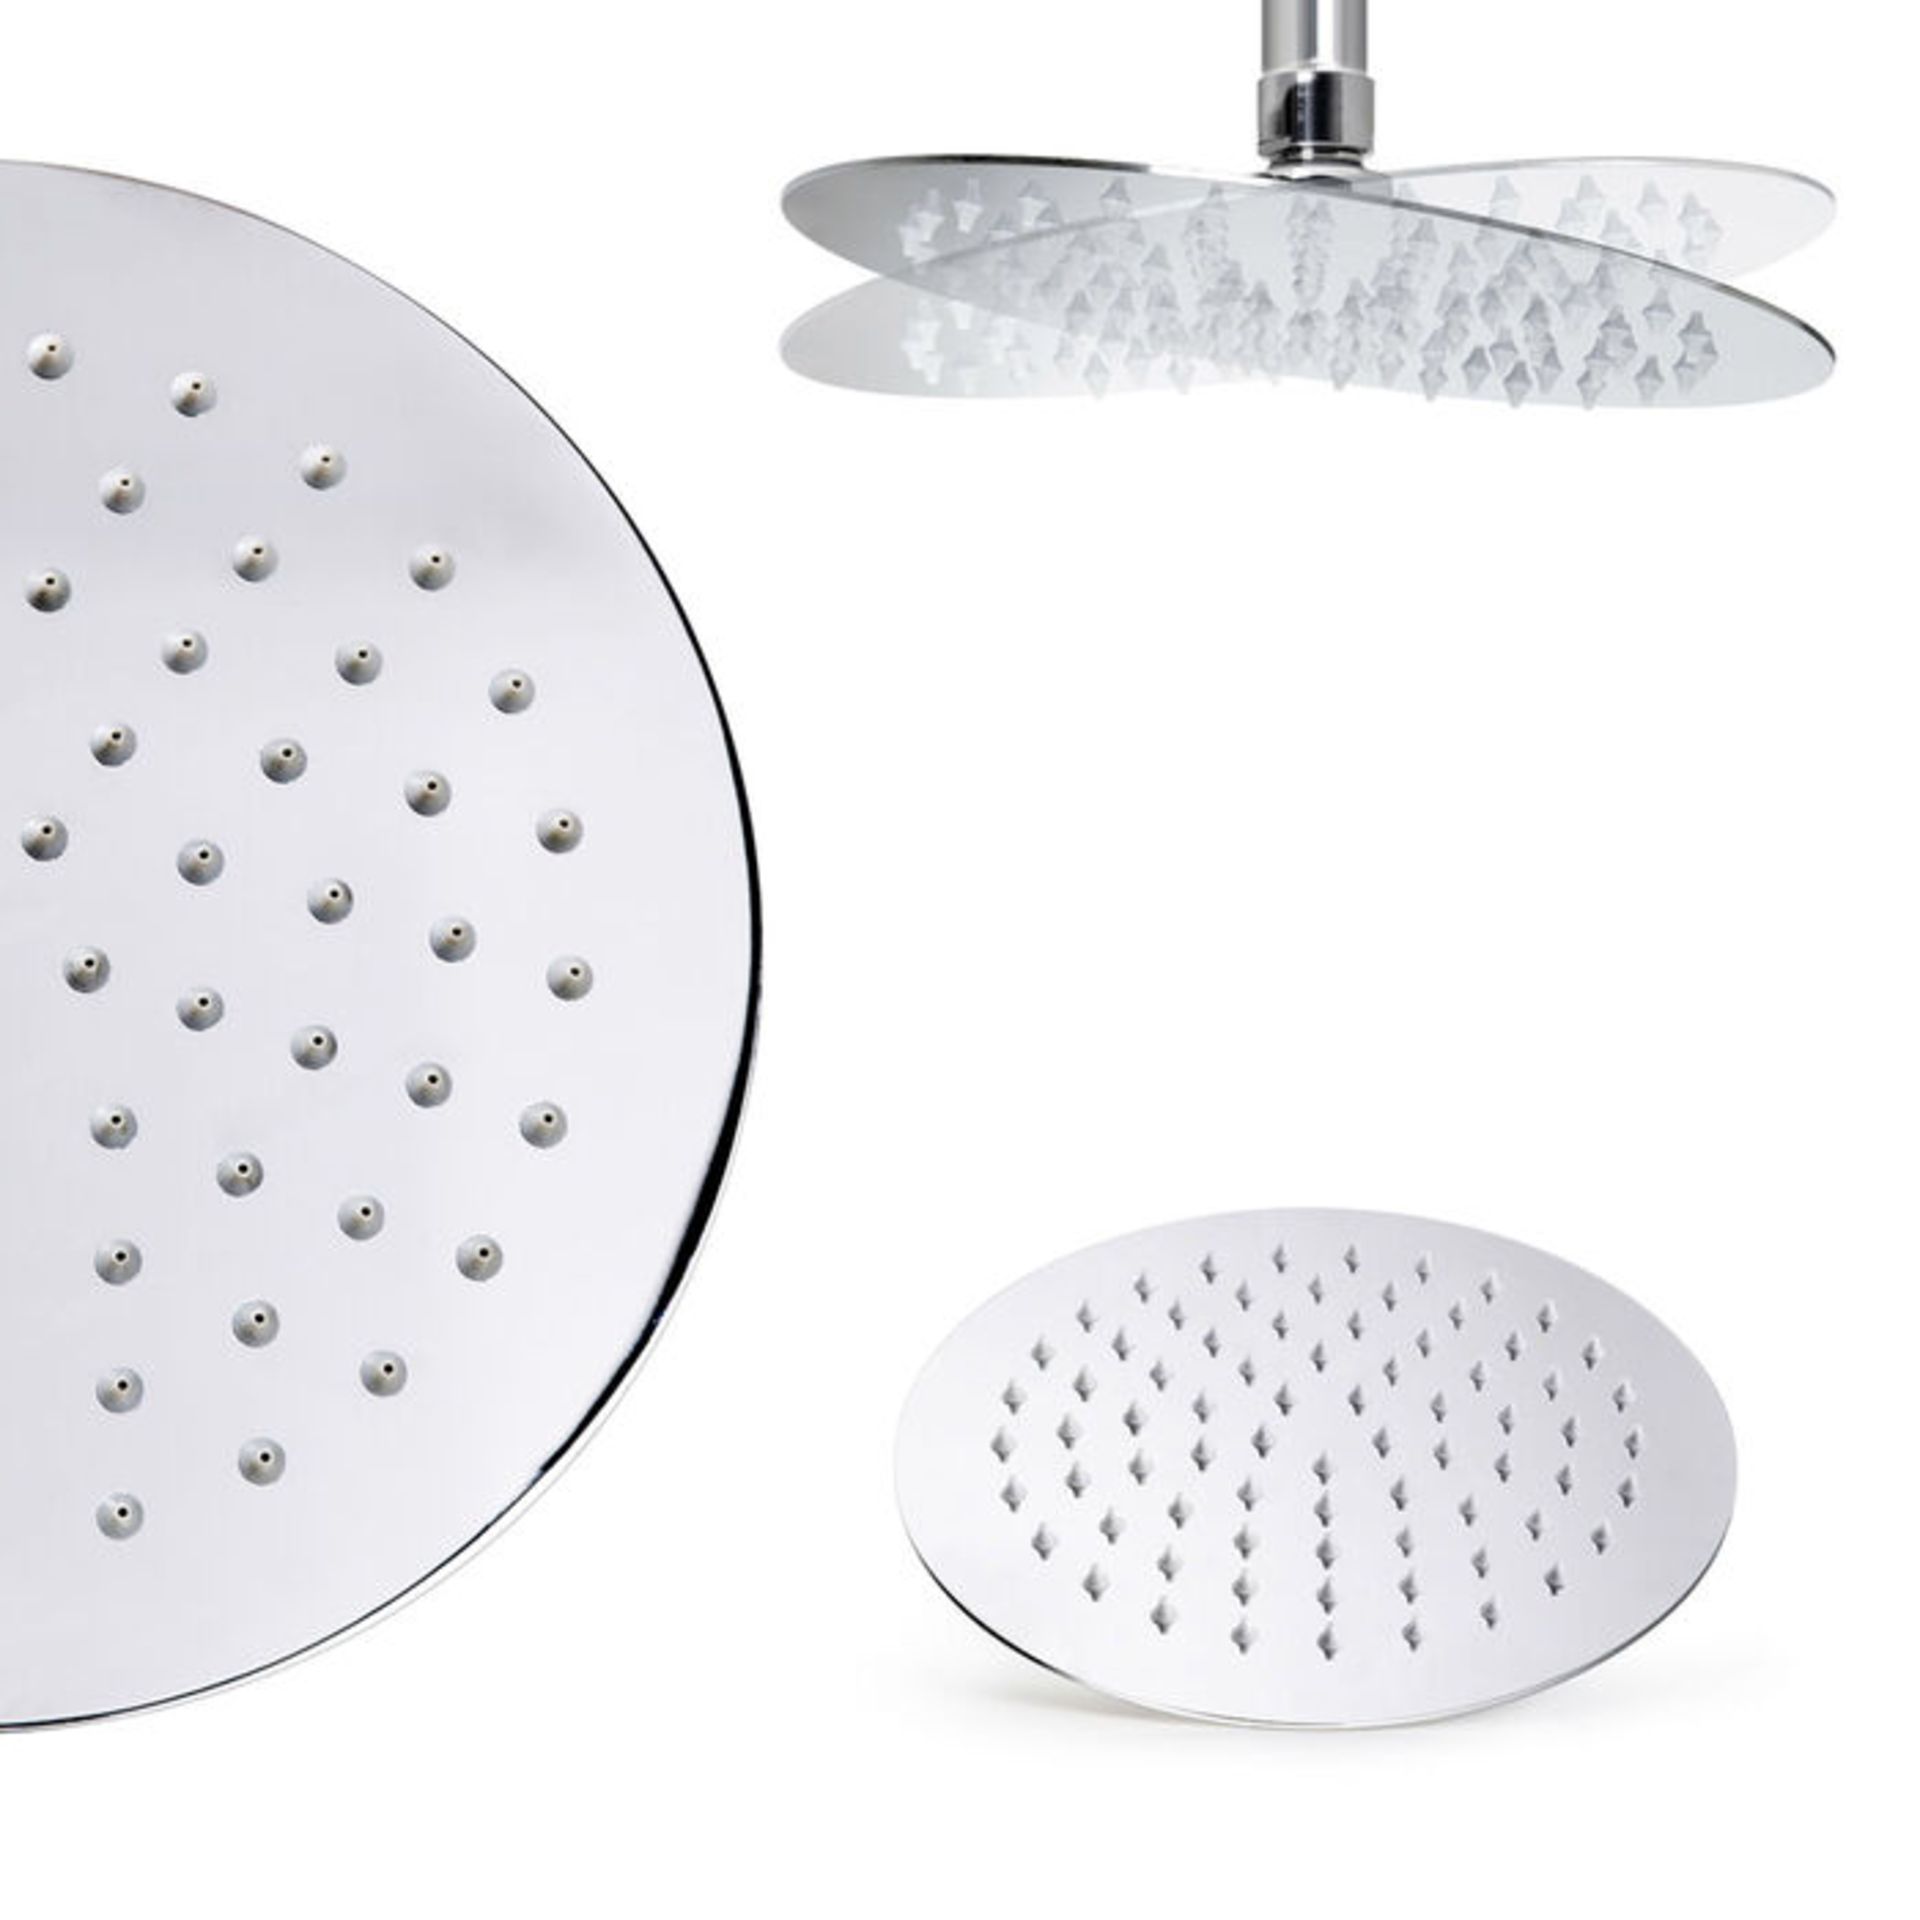 (PM1027) Stainless Steel 200mm Round Shower Head Solid metal structure Can be wall or ceiling... - Image 2 of 2